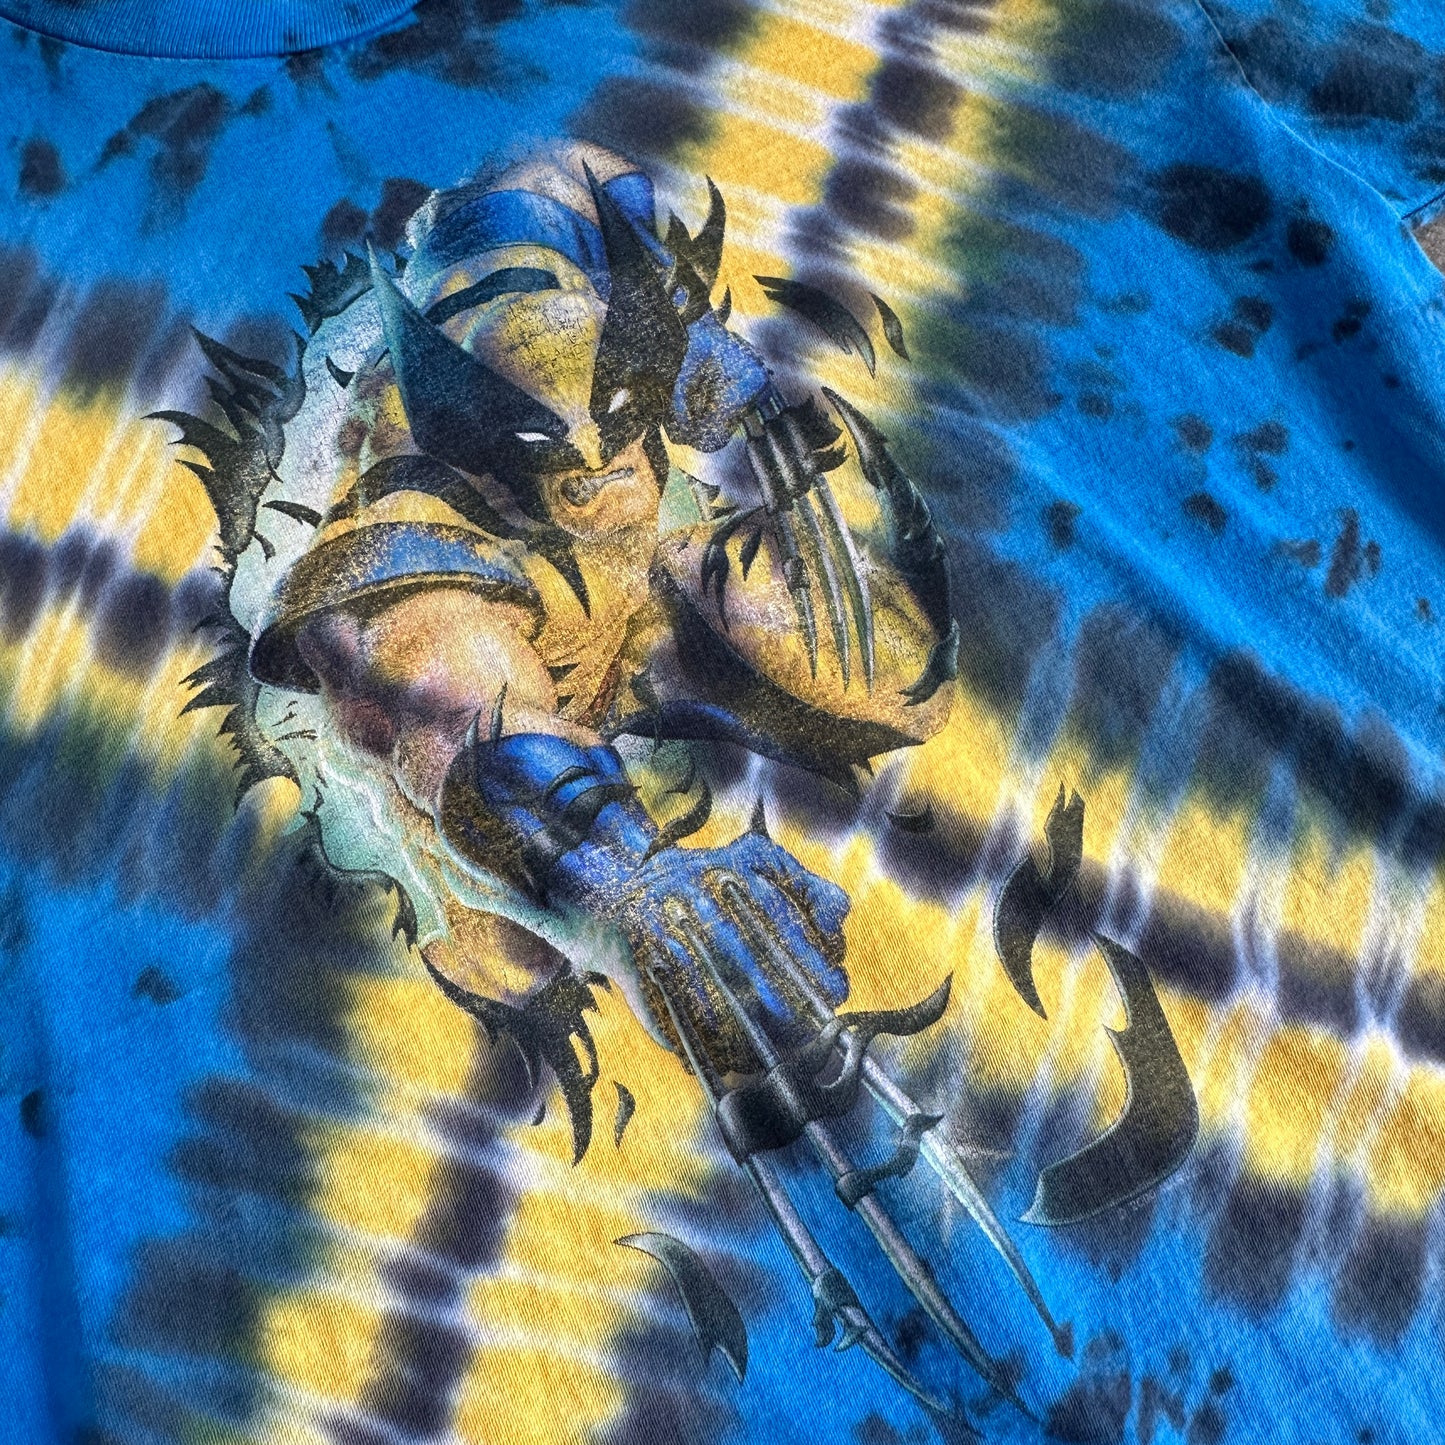 Load image into Gallery viewer, Tie-Dye Wolverine Shirt - L
